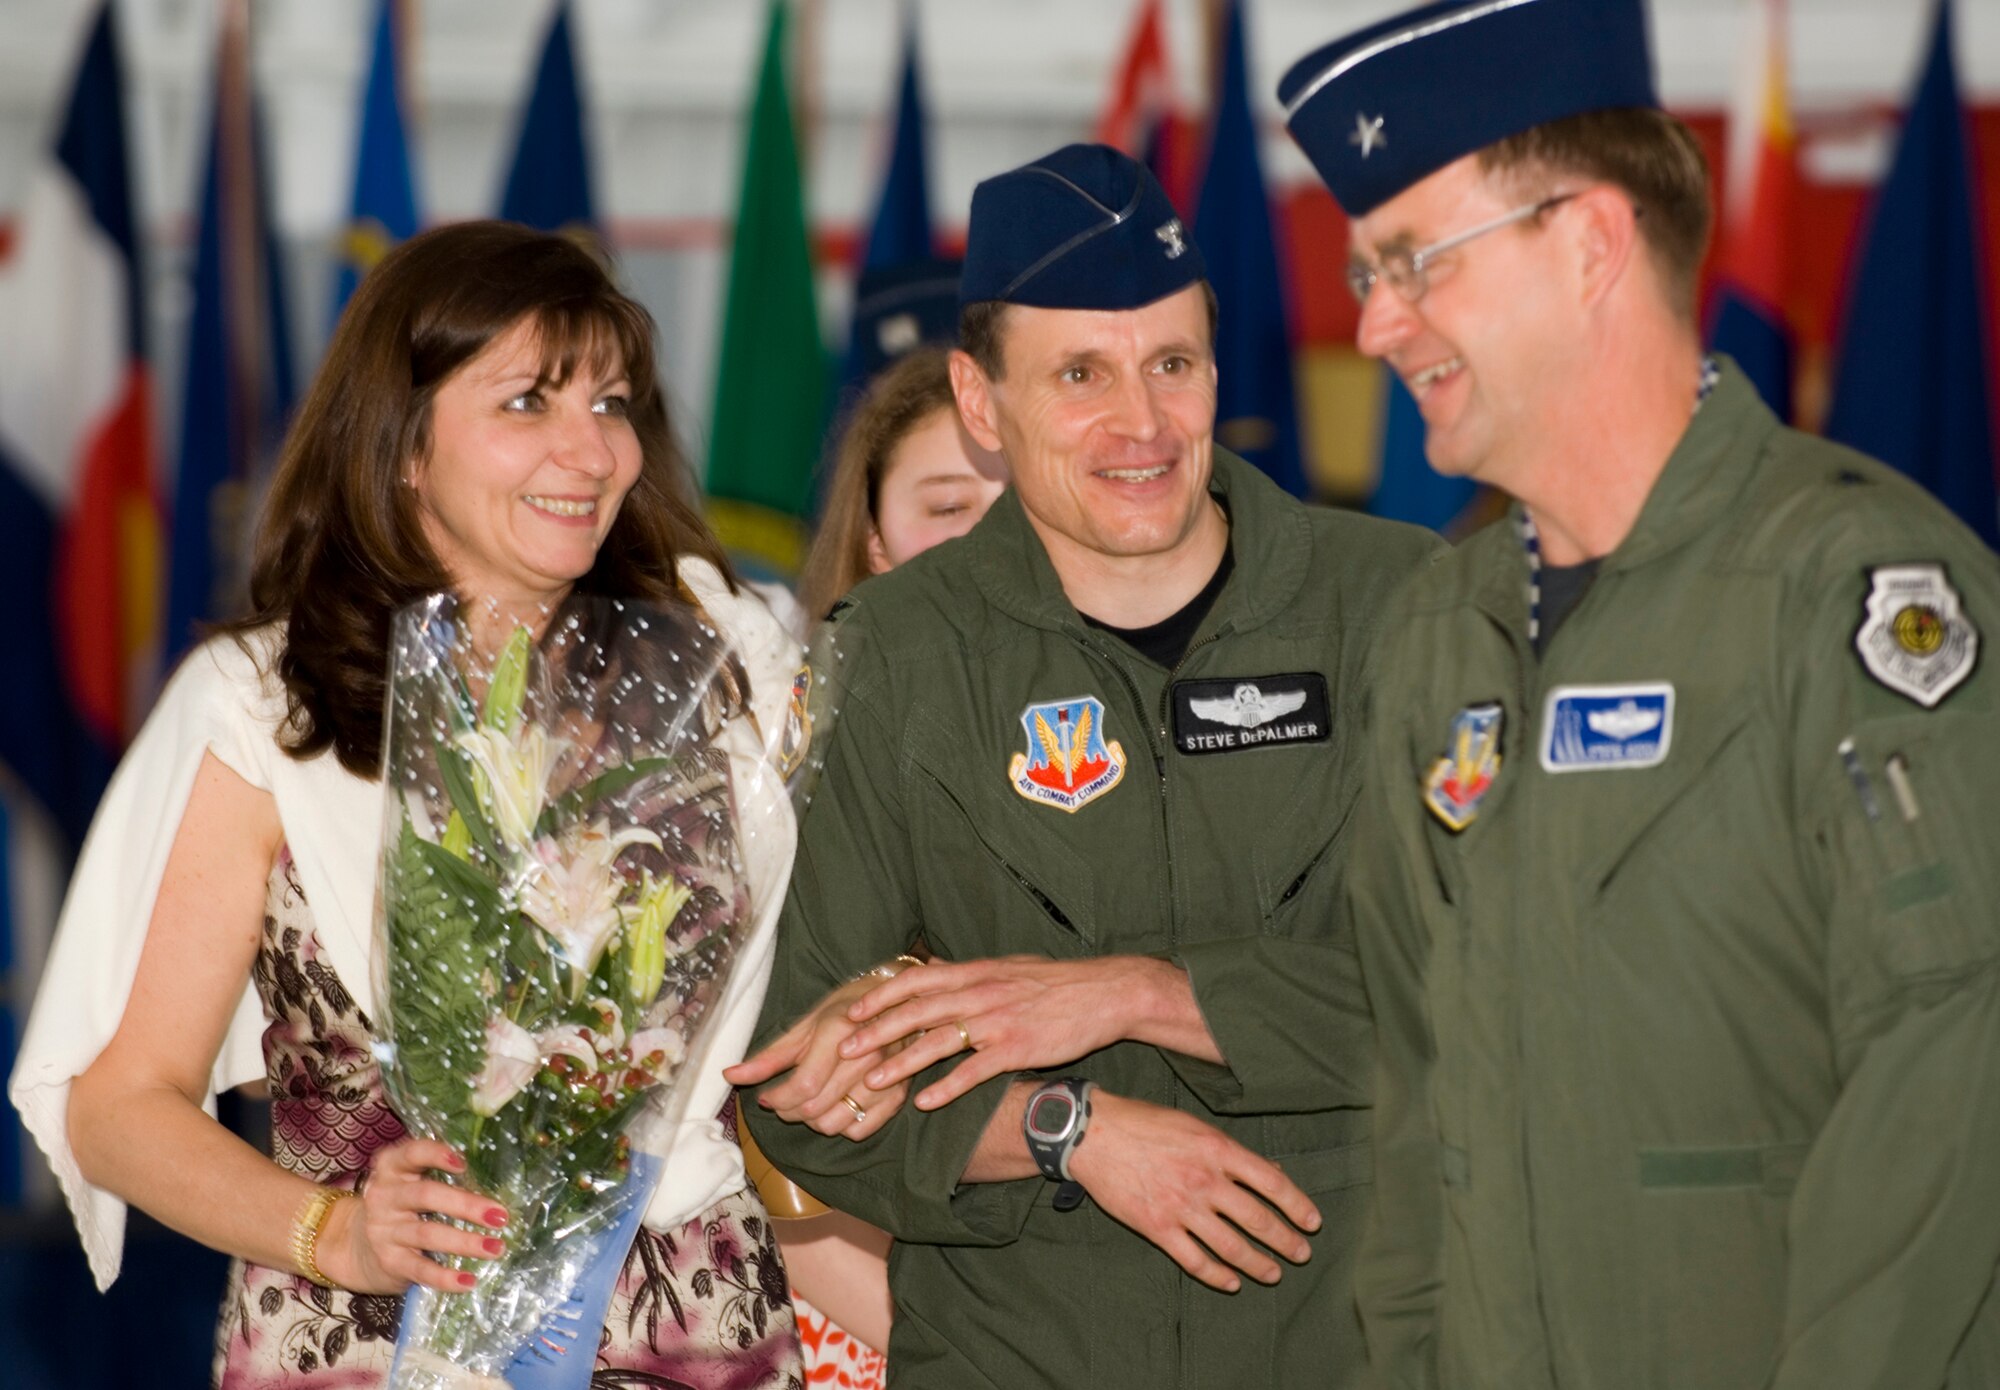 Col. Steve DePalmer, 53d Wing commander, talks with wife Sheila and Brig. Gen. Stephen Hoog, United States Air Force Warfare Center commander, after the wing change of command ceremony April 11 at Eglin Air Force Base, Fla.  Colonel DePalmer assumed command of the wing from Col. Ken Wilsbach.  Air Force photo by Debbie Haussermann.